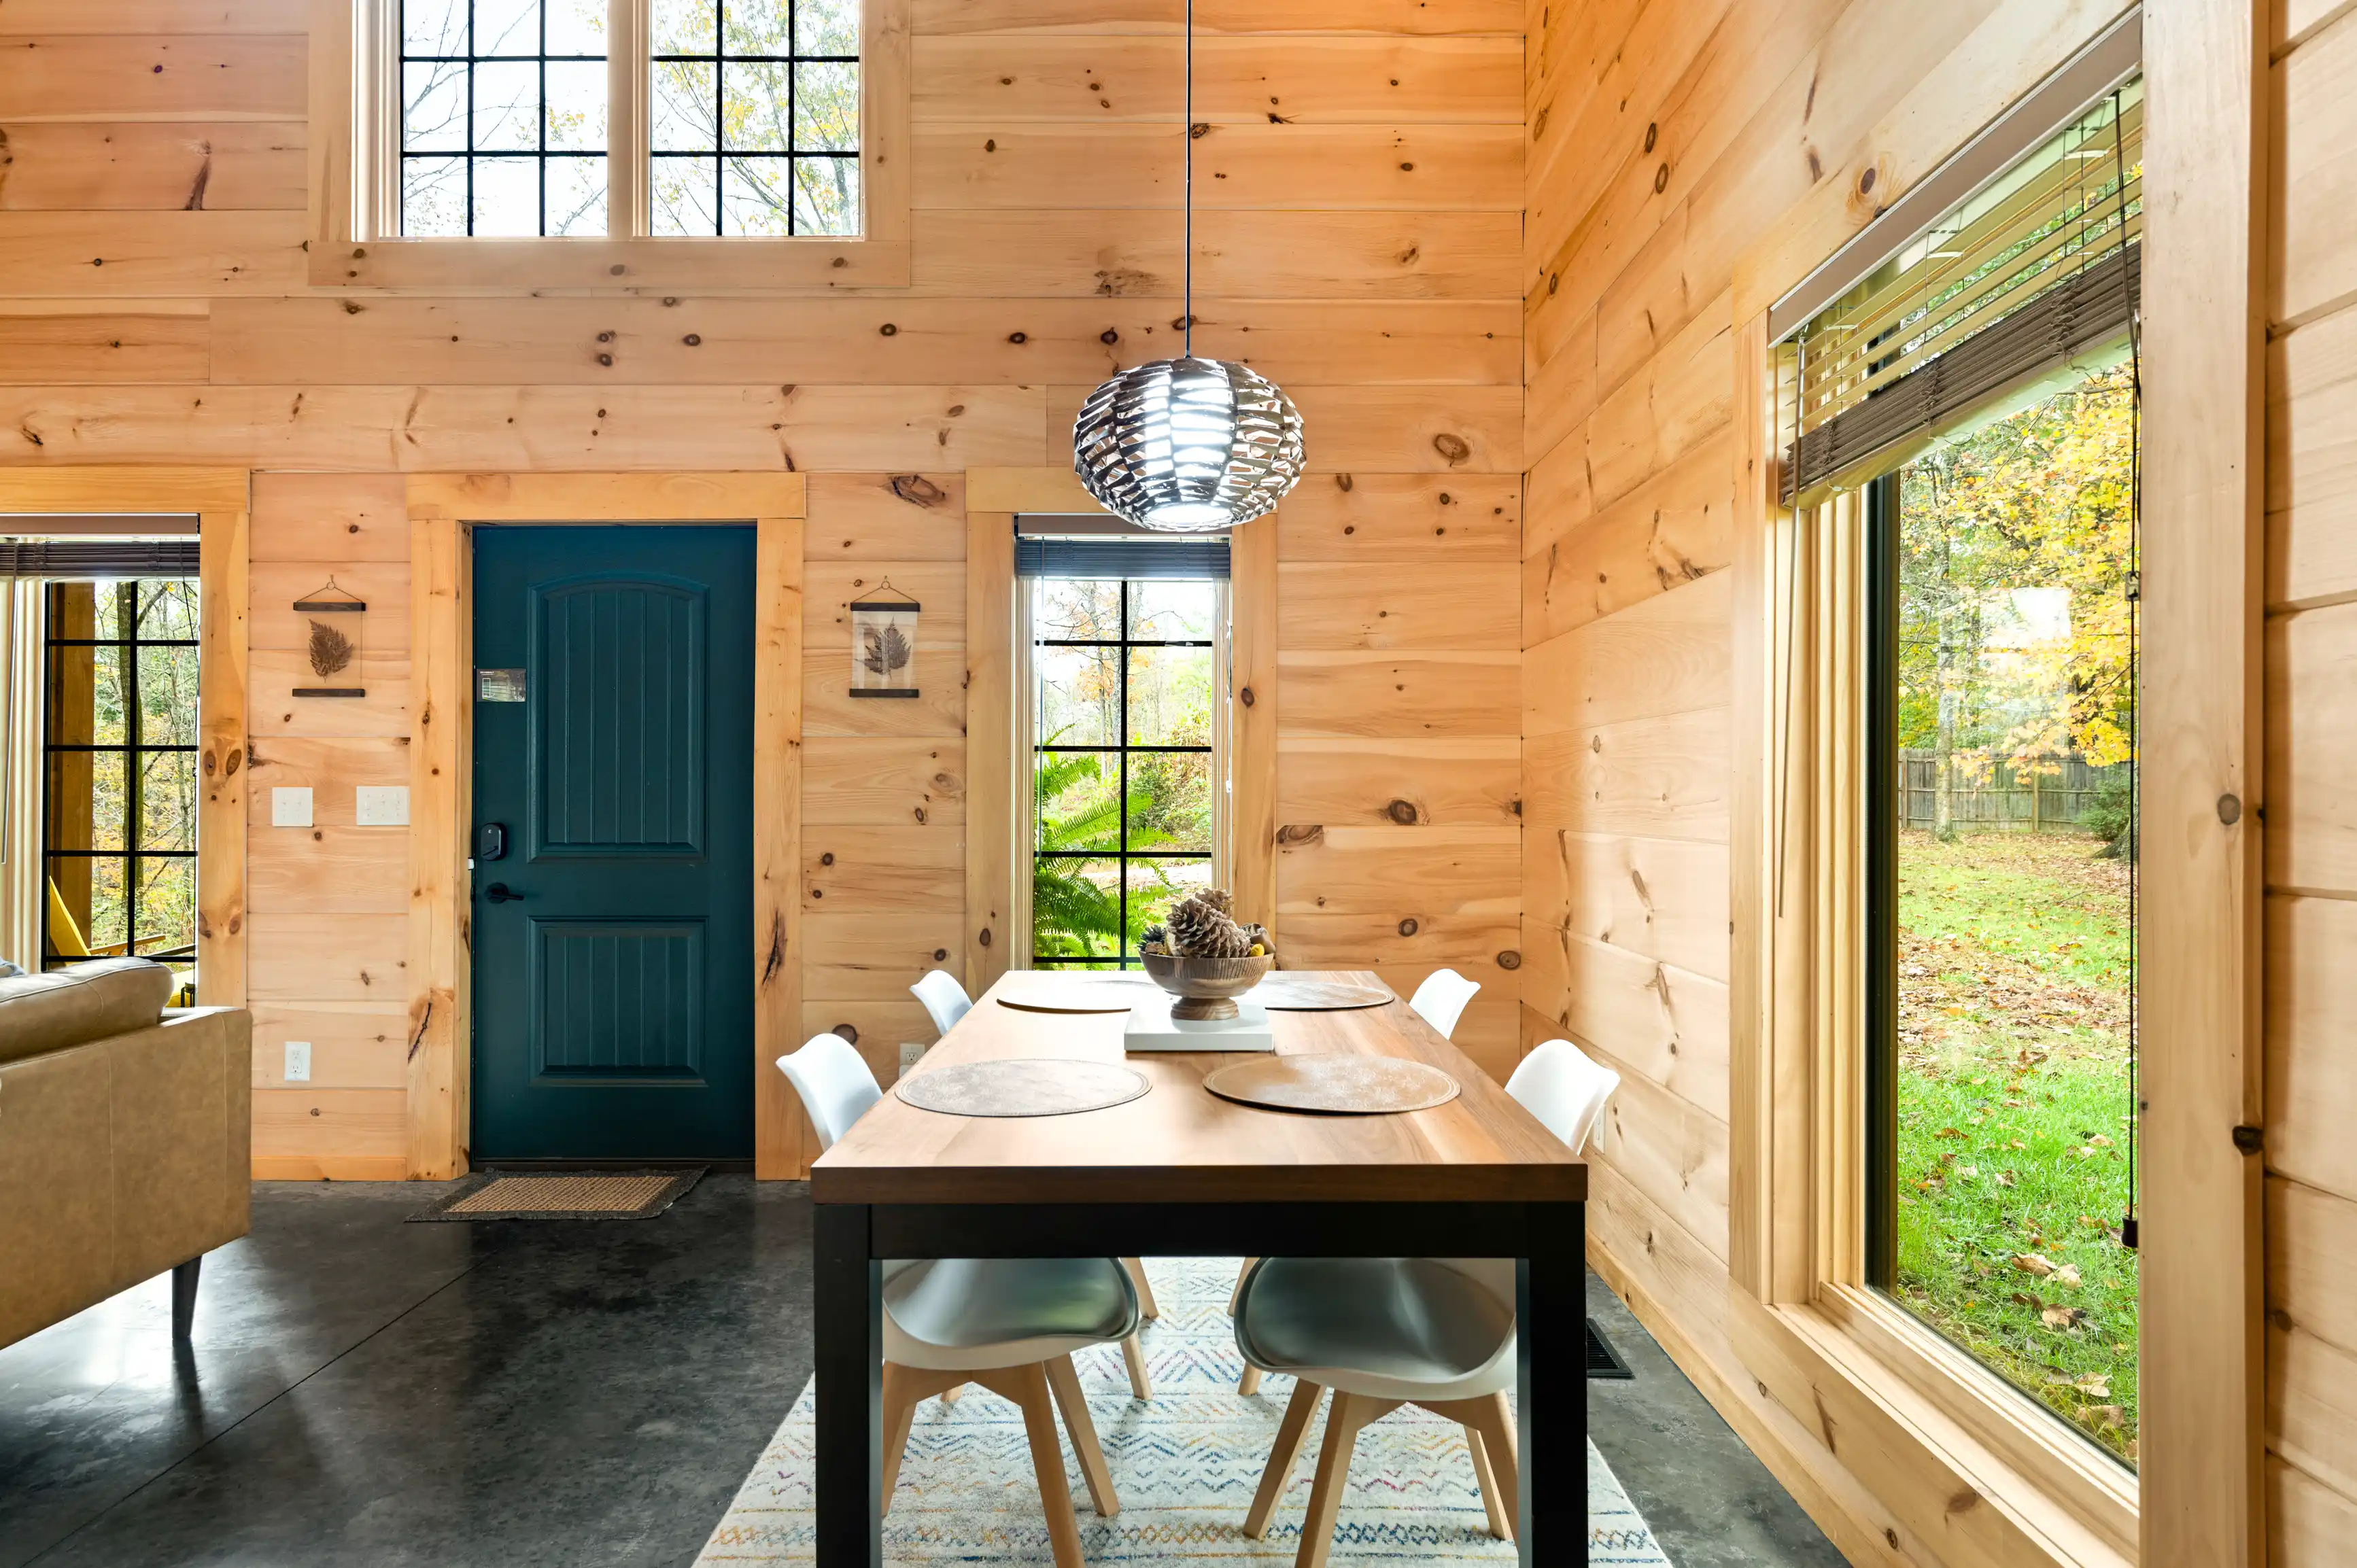 Cozy wooden cabin interior with a dining table, chairs, and a view of the outdoors through large windows.